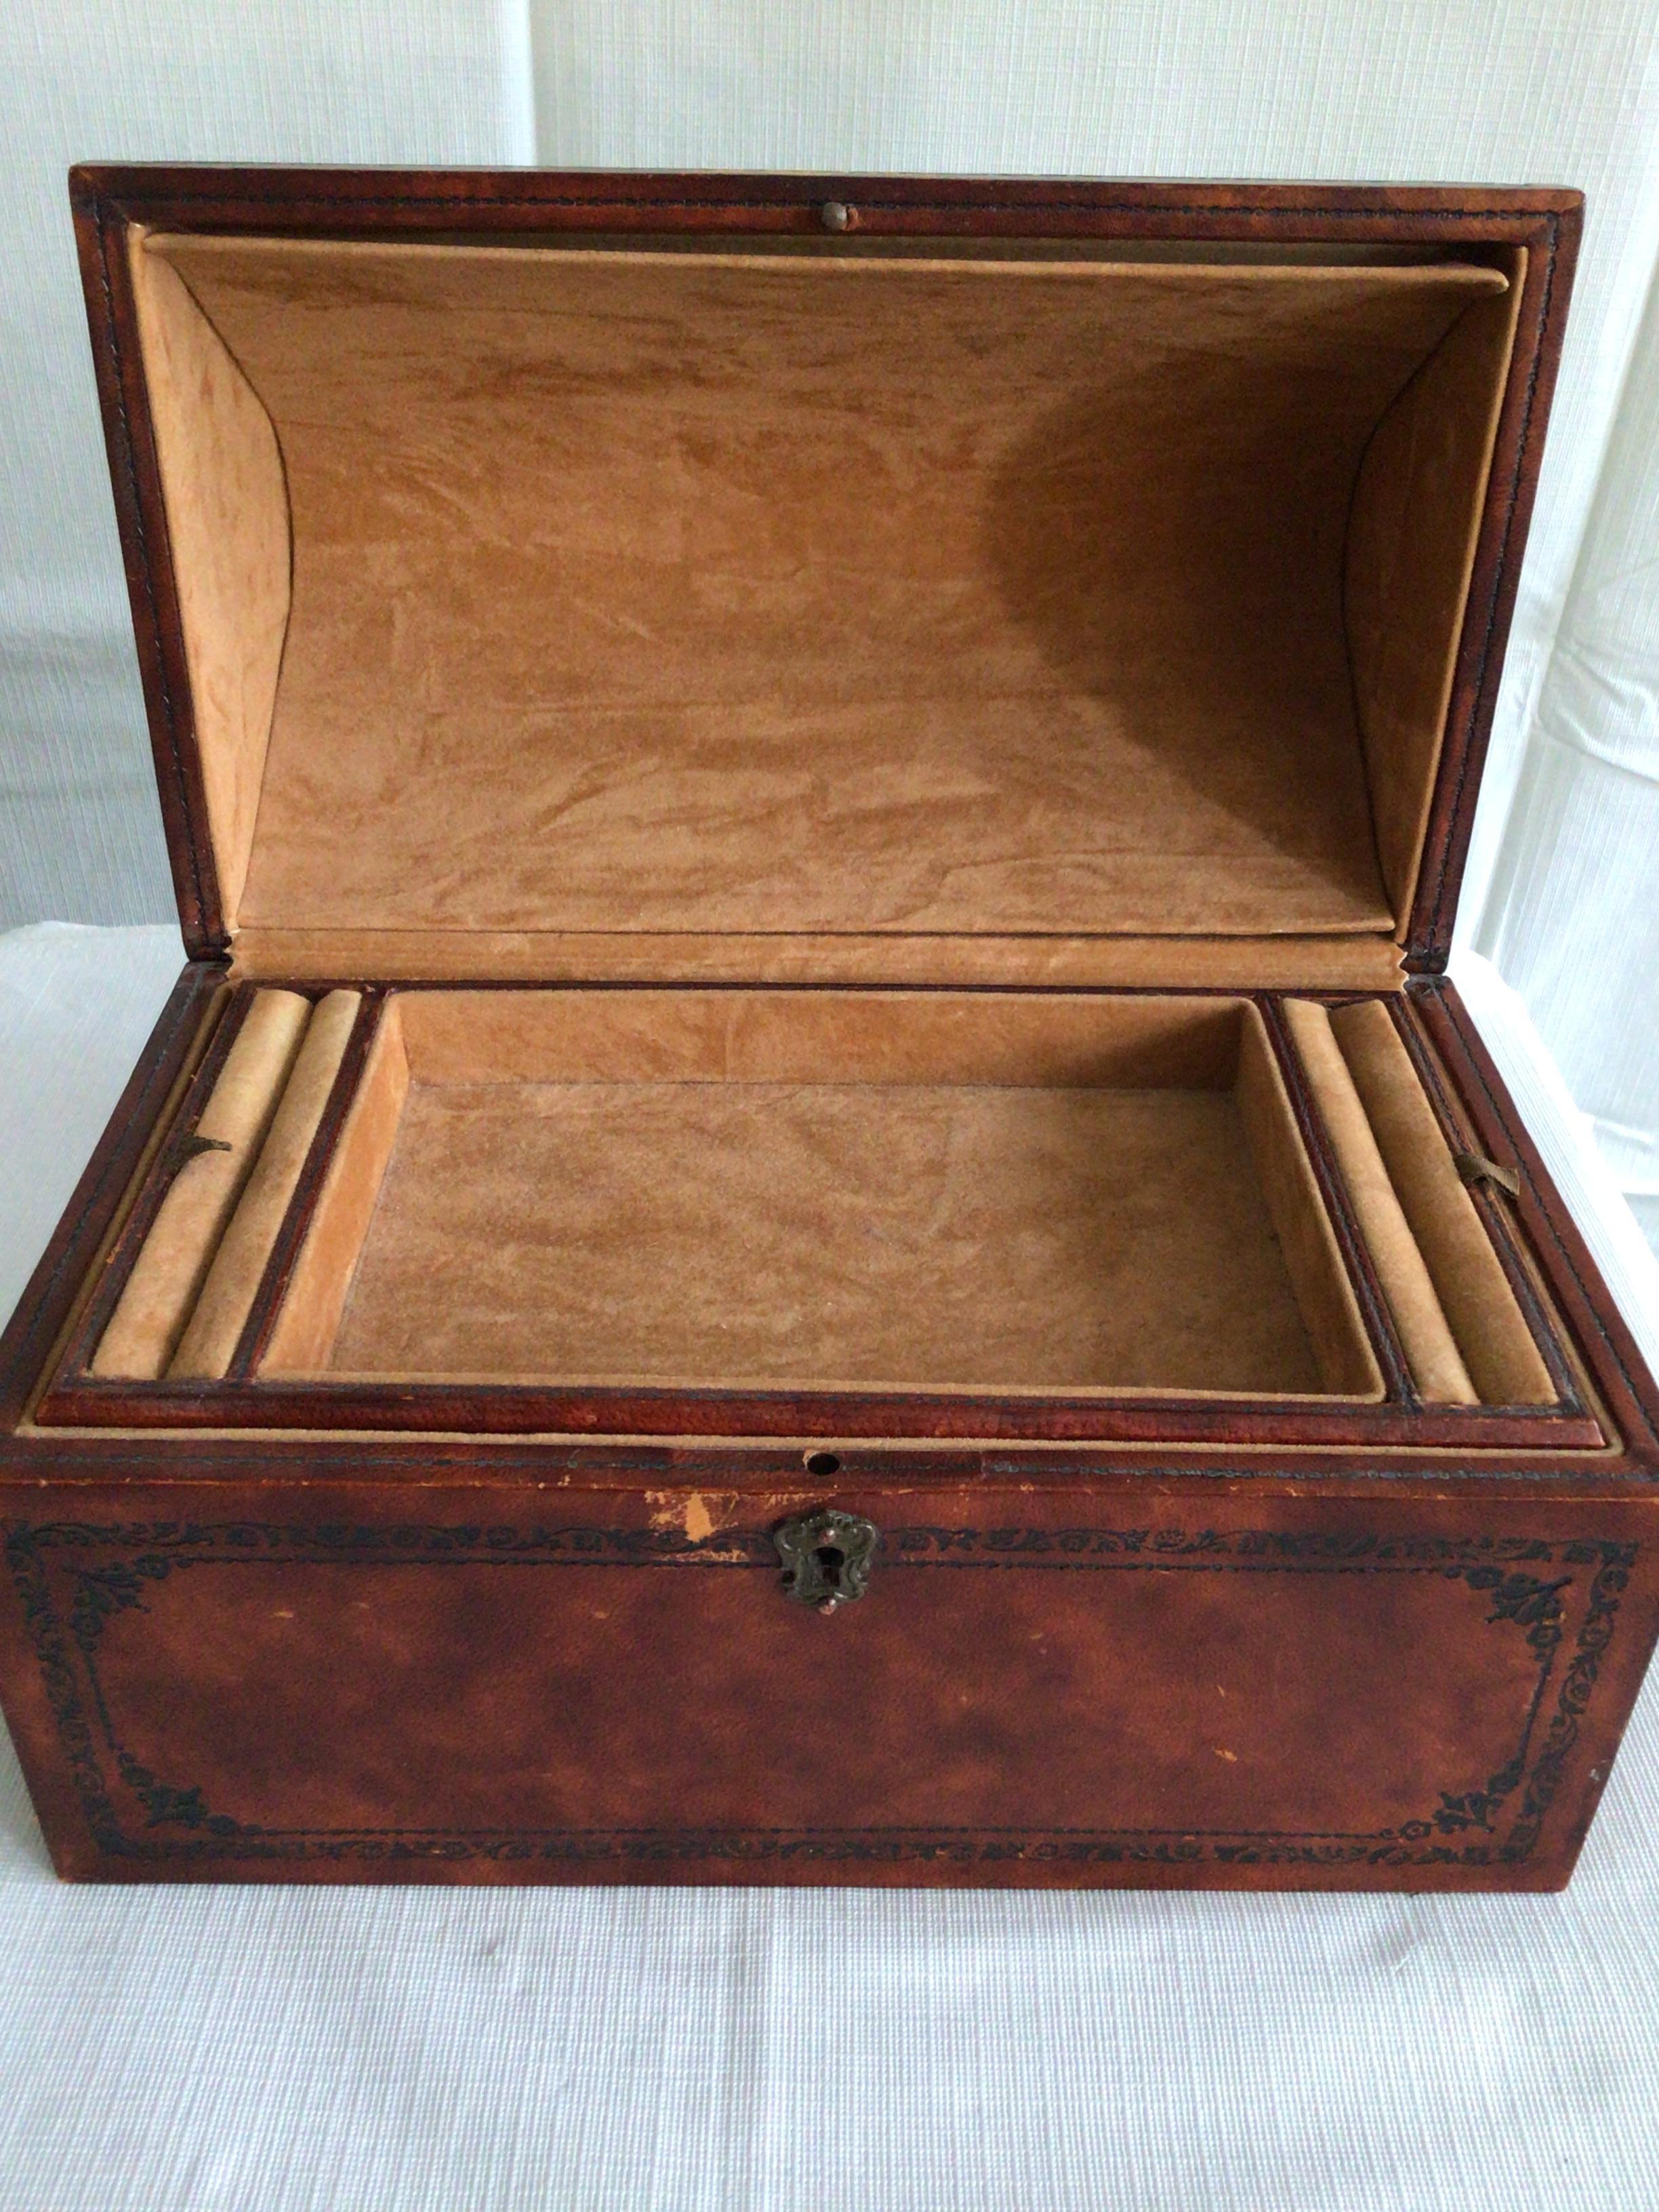 1960s Italian Leather Jewelry Box with Metal Handles For Sale 2